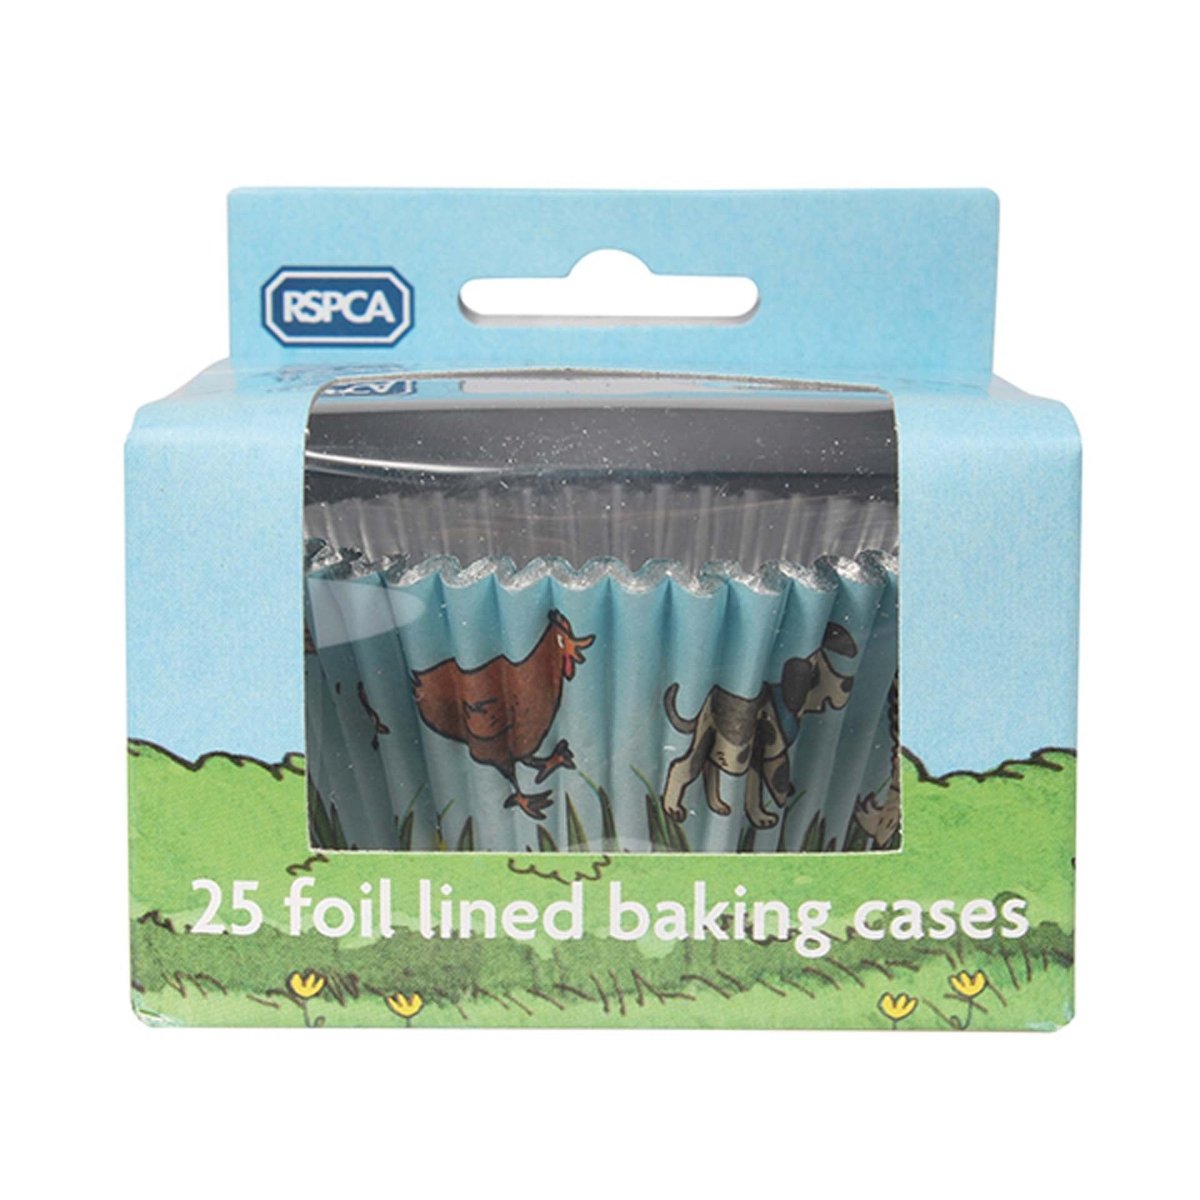 RSPCA Cupcake Baking Cases, Pack of 6